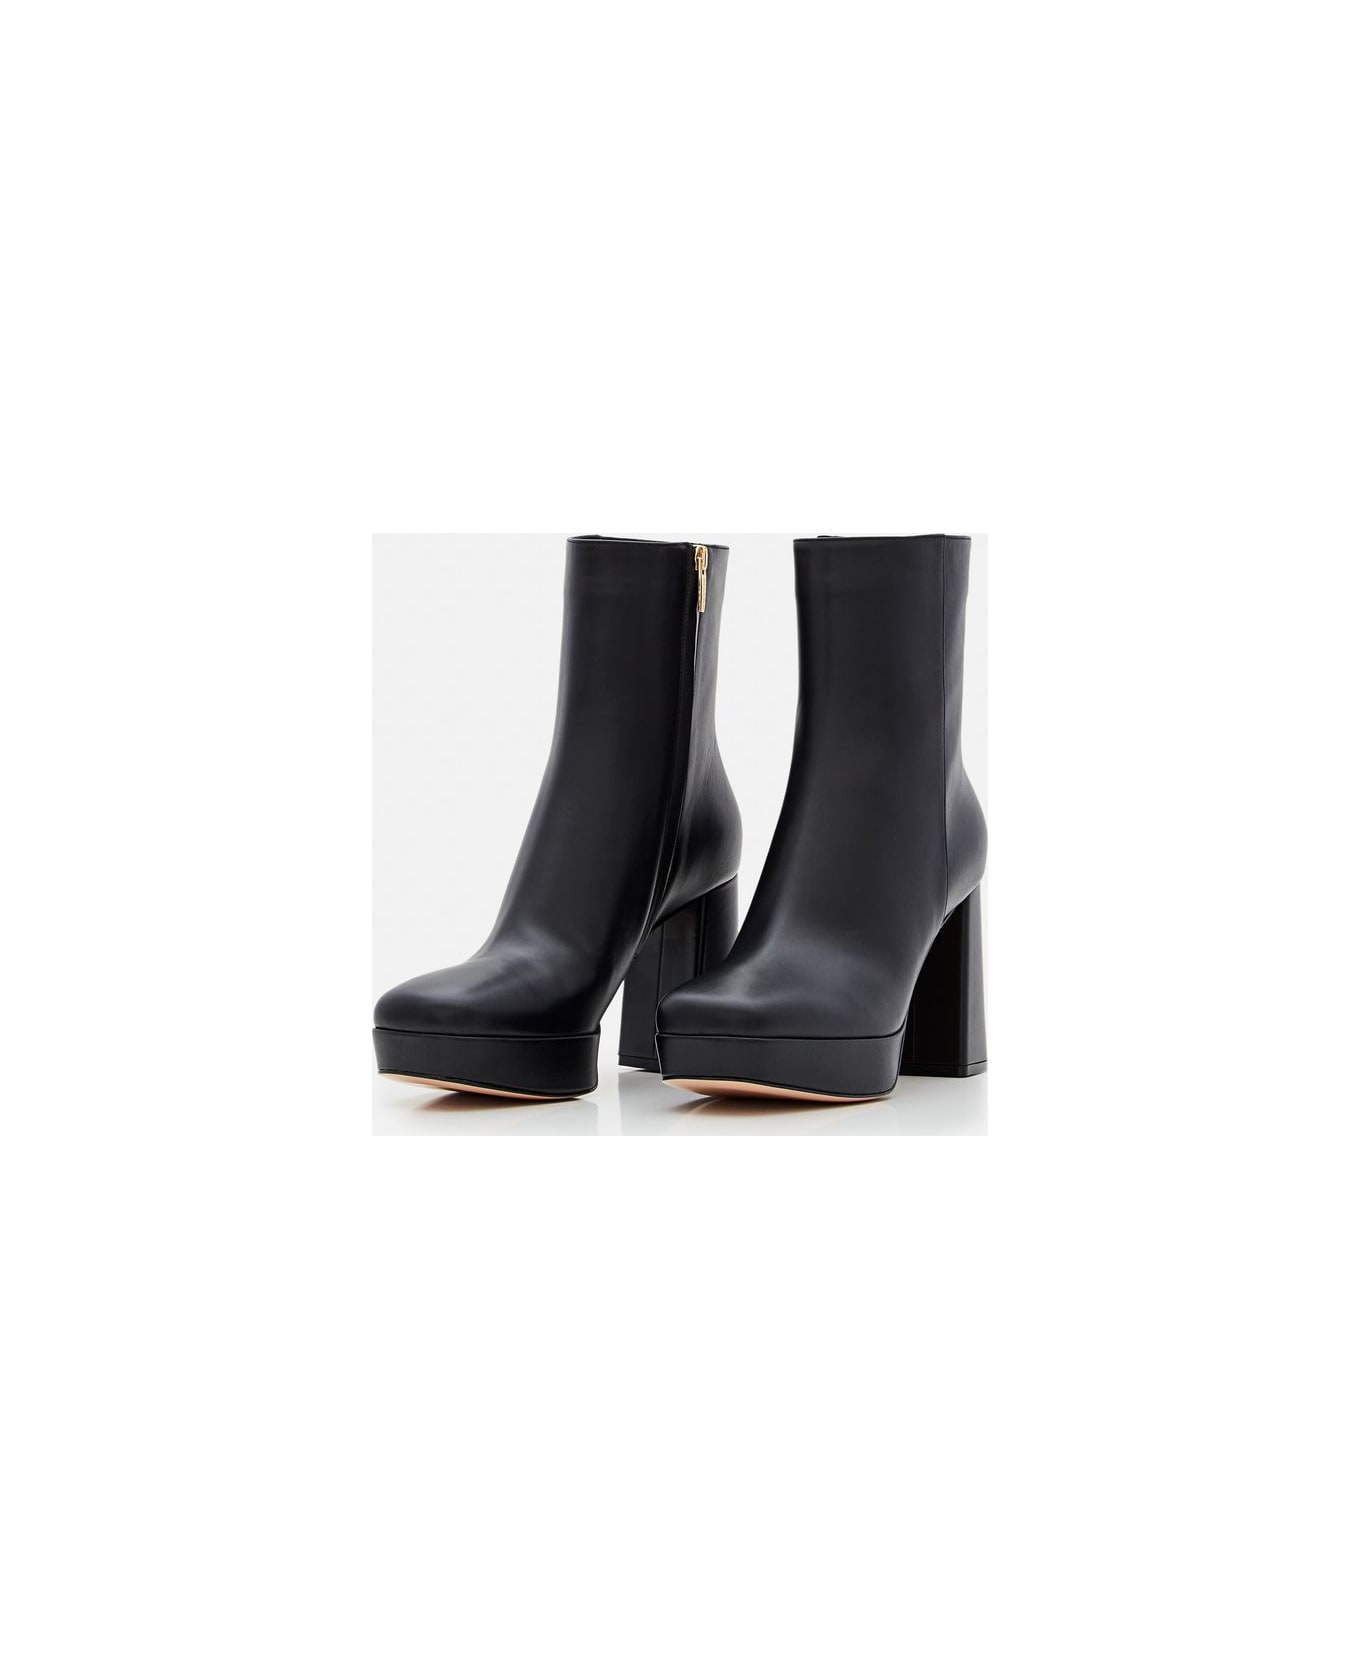 Gianvito Rossi Daisen Heeled Leather Boots - Black